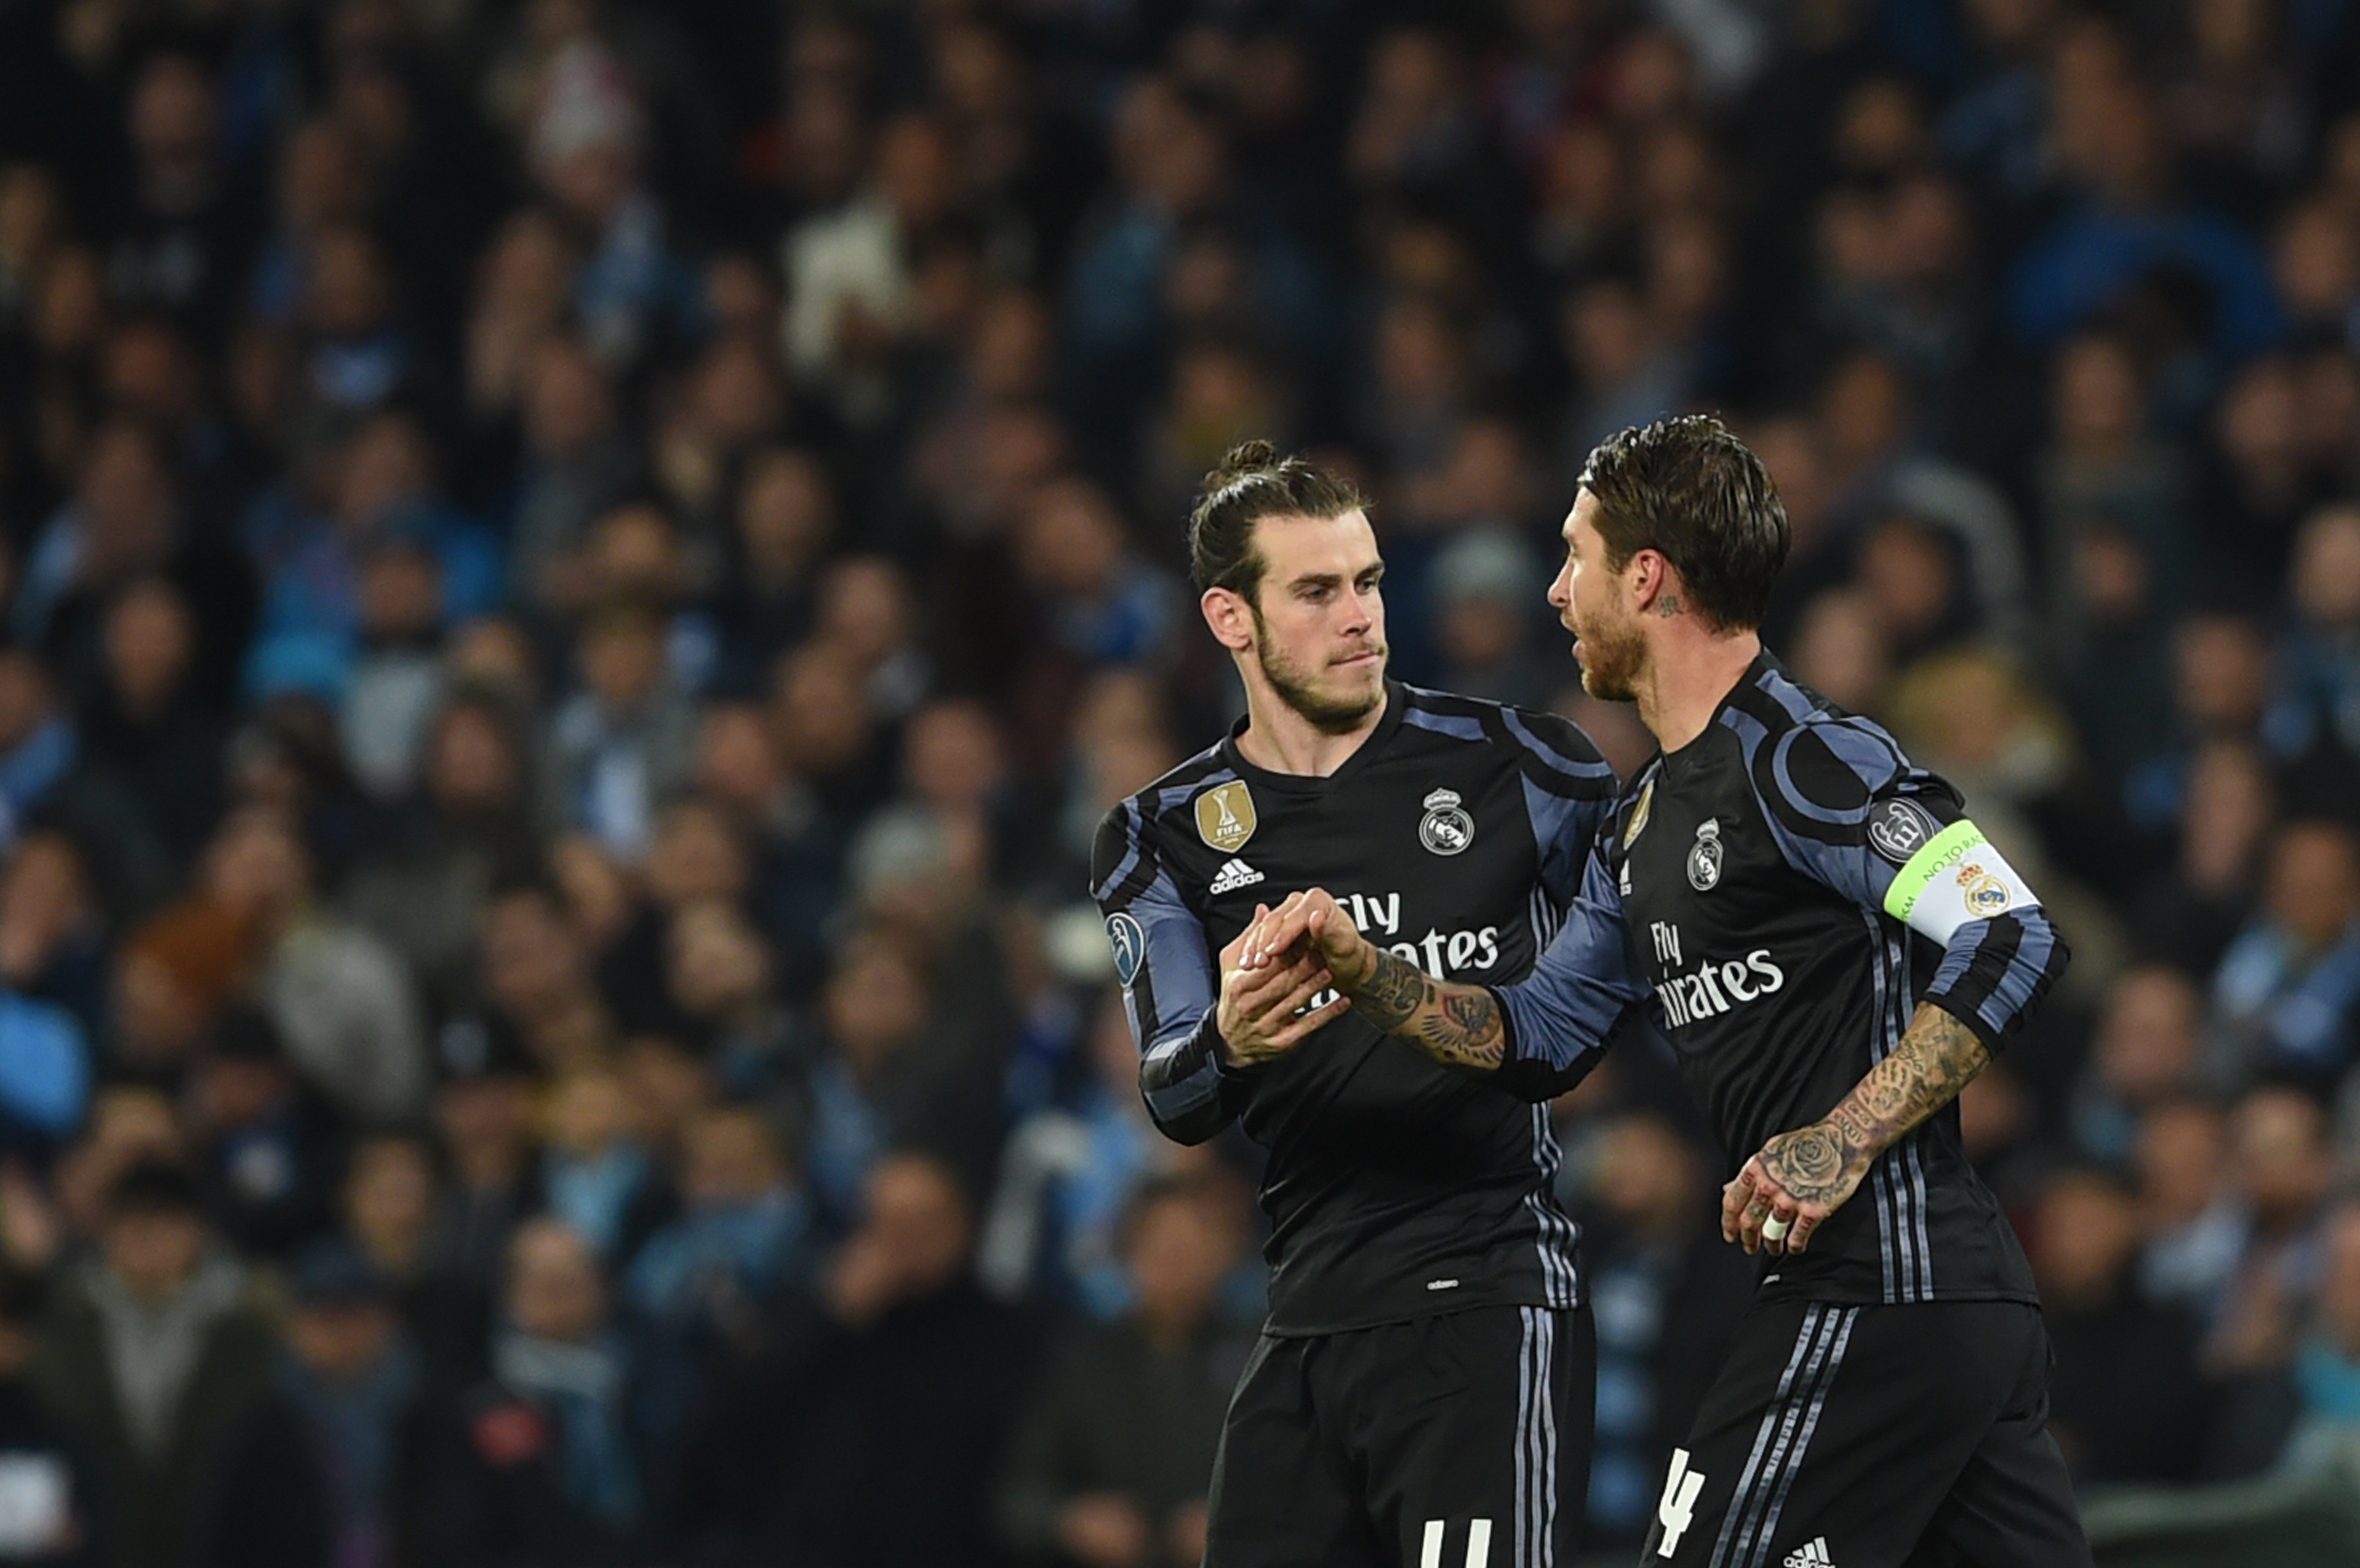 Real Madrid's defender Sergio Ramos (R) is congratulated by teammate Real Madrid's Welsh forward Gareth Bale after scoring during the UEFA Champions League football match SSC Napoli vs Real Madrid on March 7, 2017 at the San Paolo stadium in Naples. / AFP PHOTO / Filippo MONTEFORTE        (Photo credit should read FILIPPO MONTEFORTE/AFP/Getty Images)